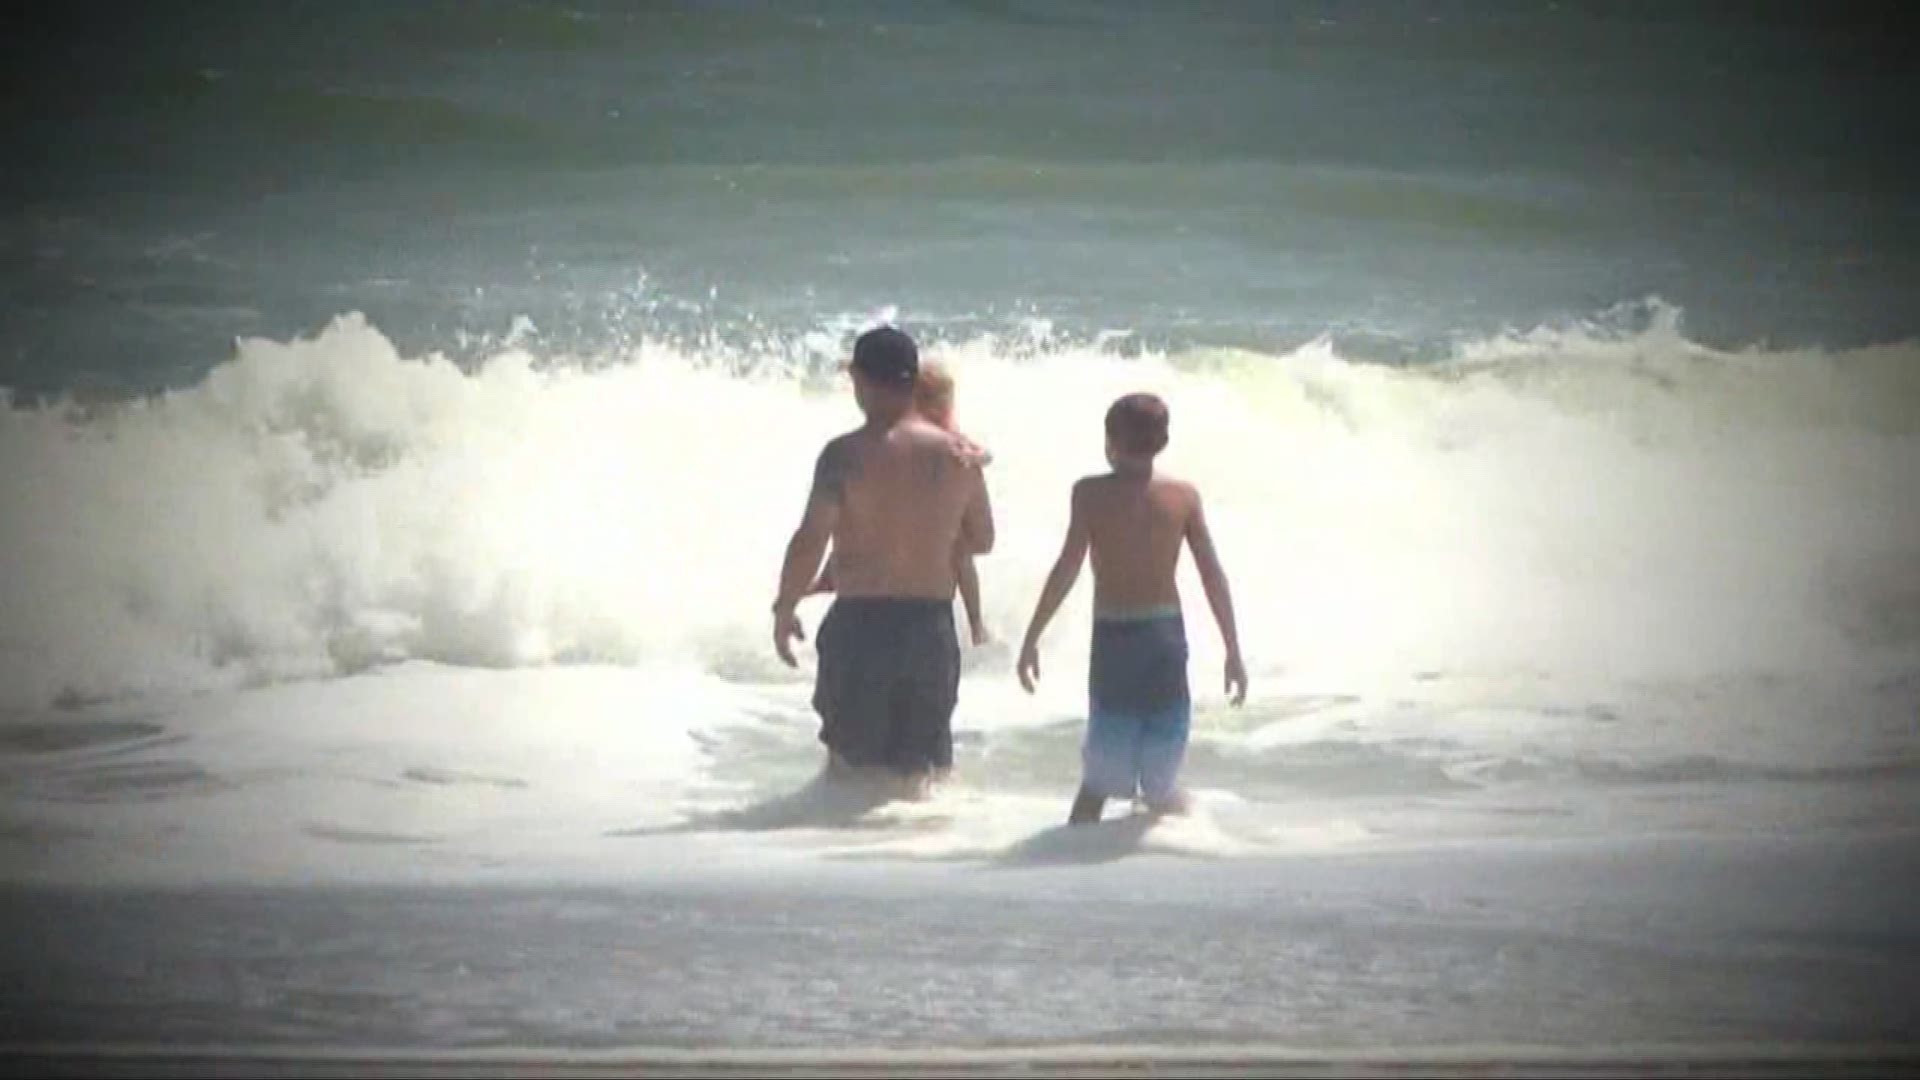 May 22, 2018: Who is more at risk for drowning? WKYC"s Austin Love has some facts to help keep your family safe.